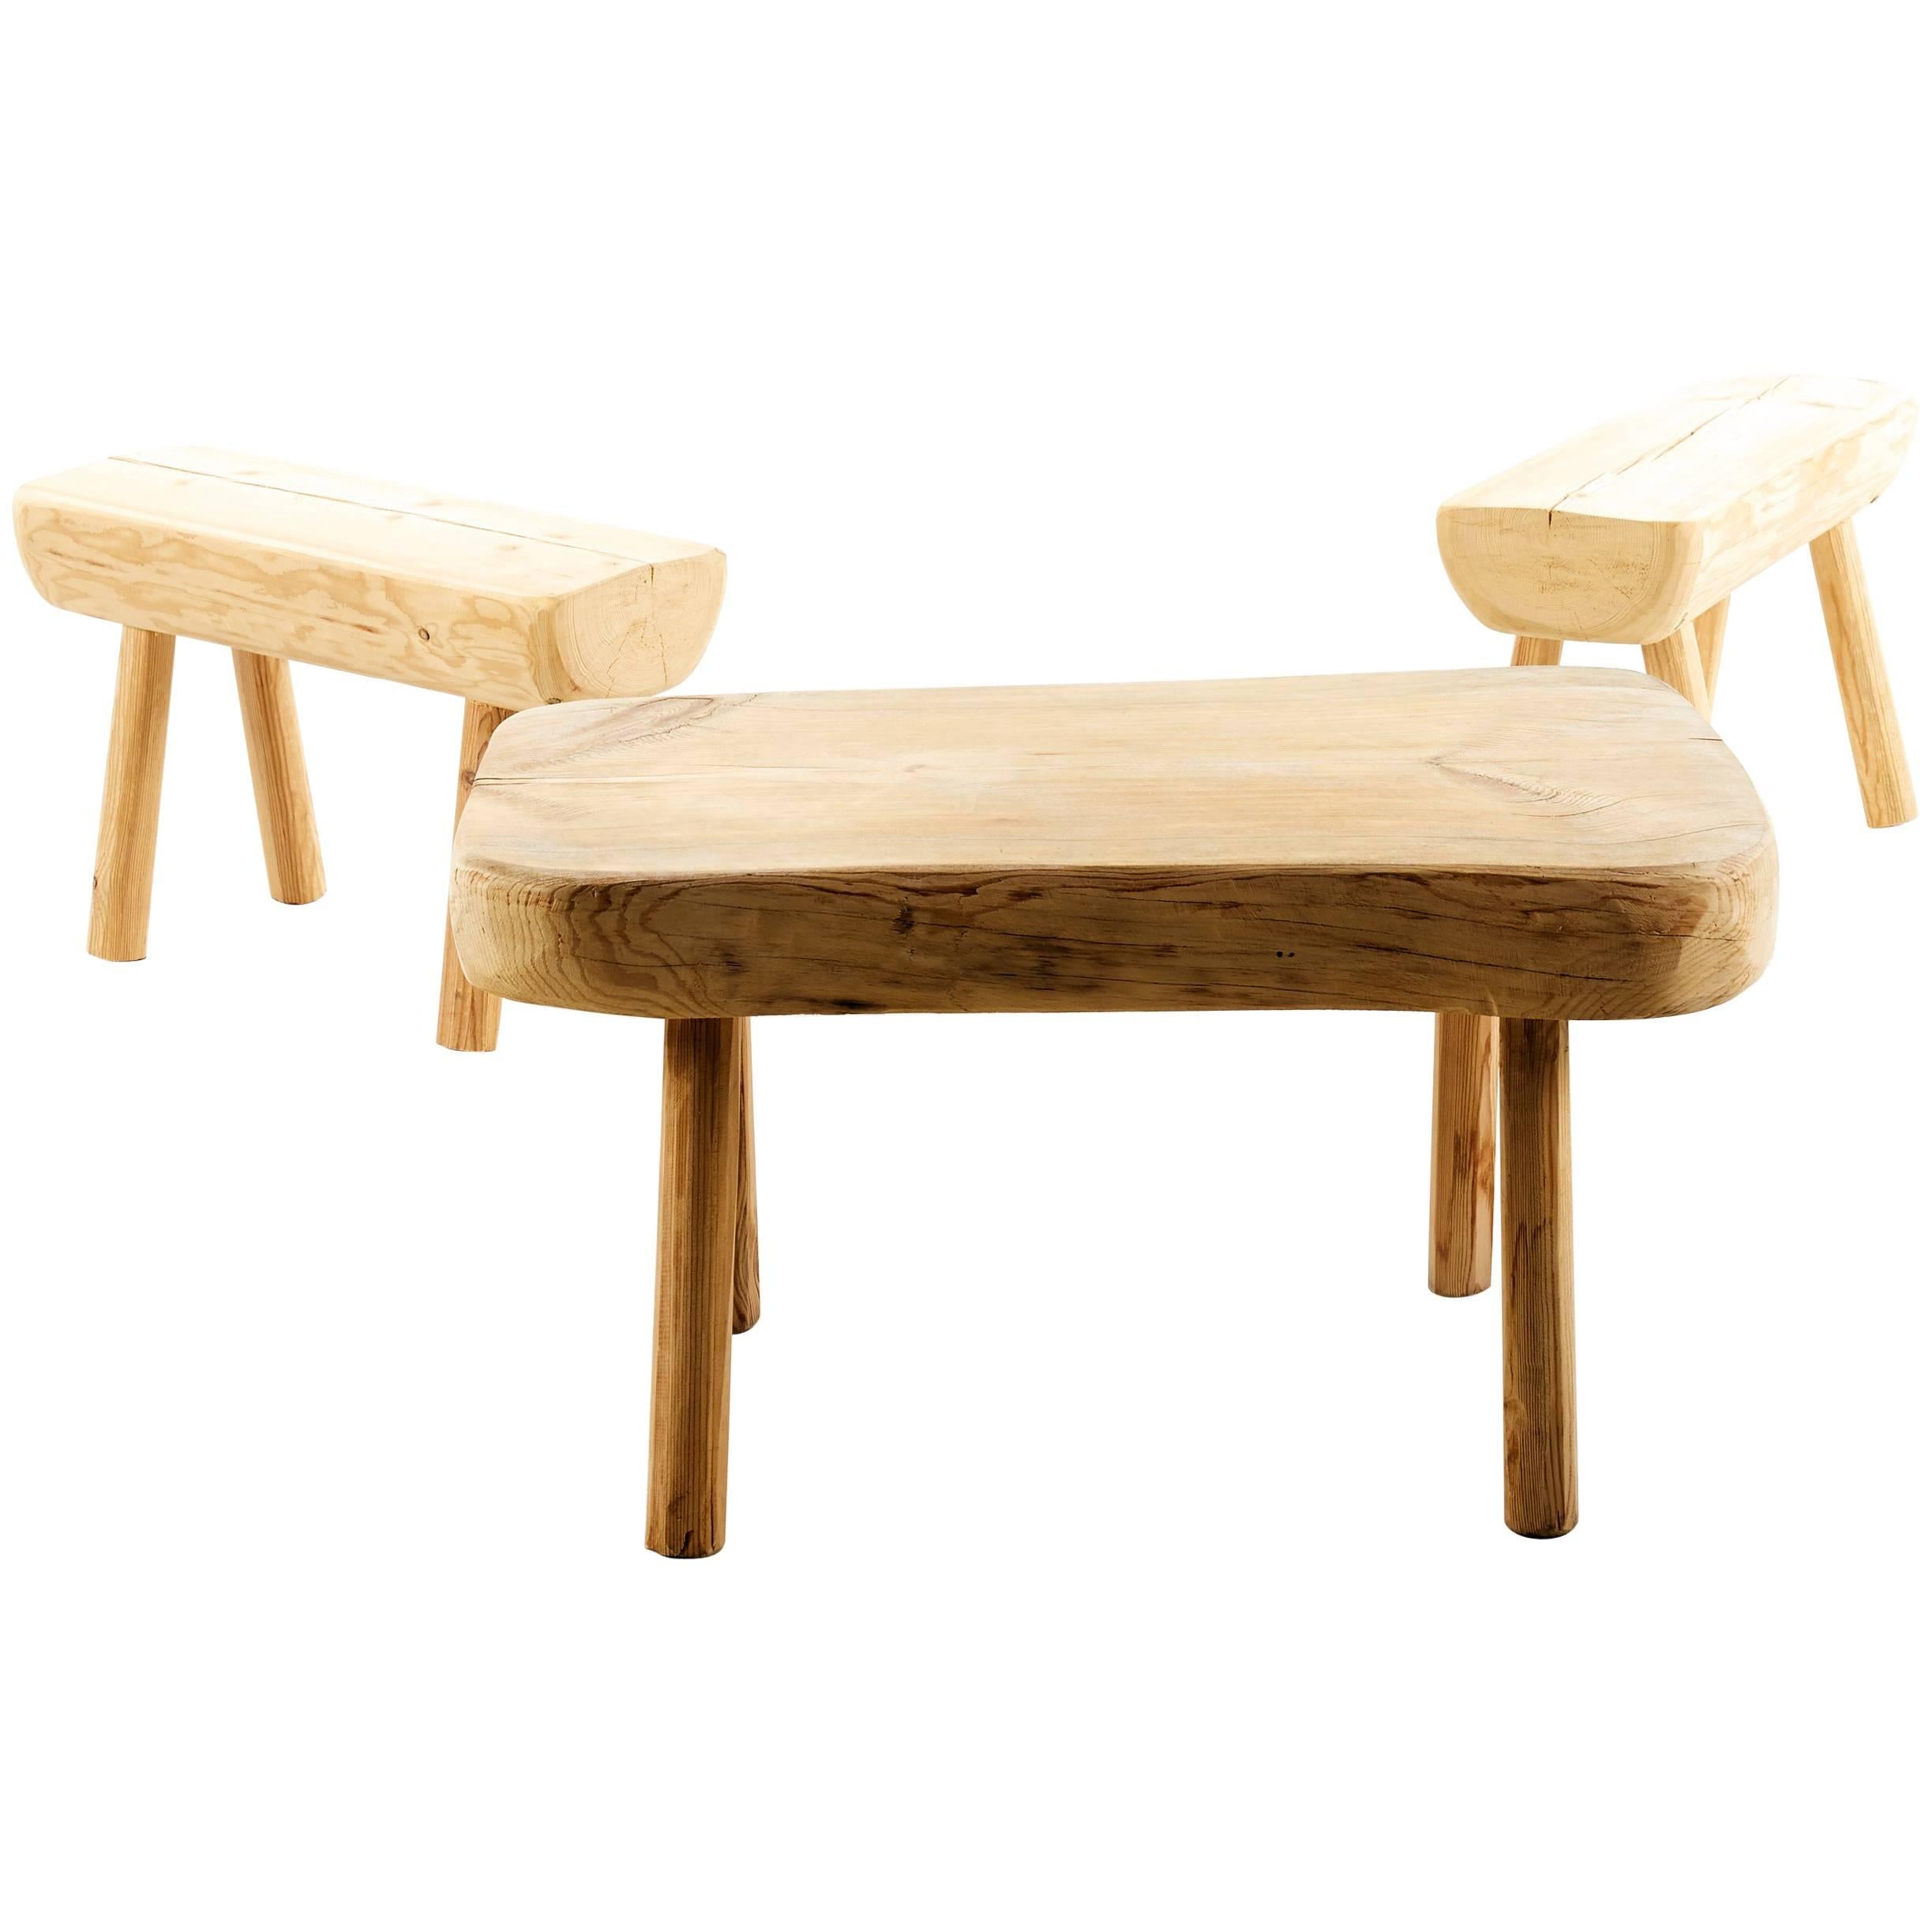 Swedish, Rustic Solid Wood Benches For Sale